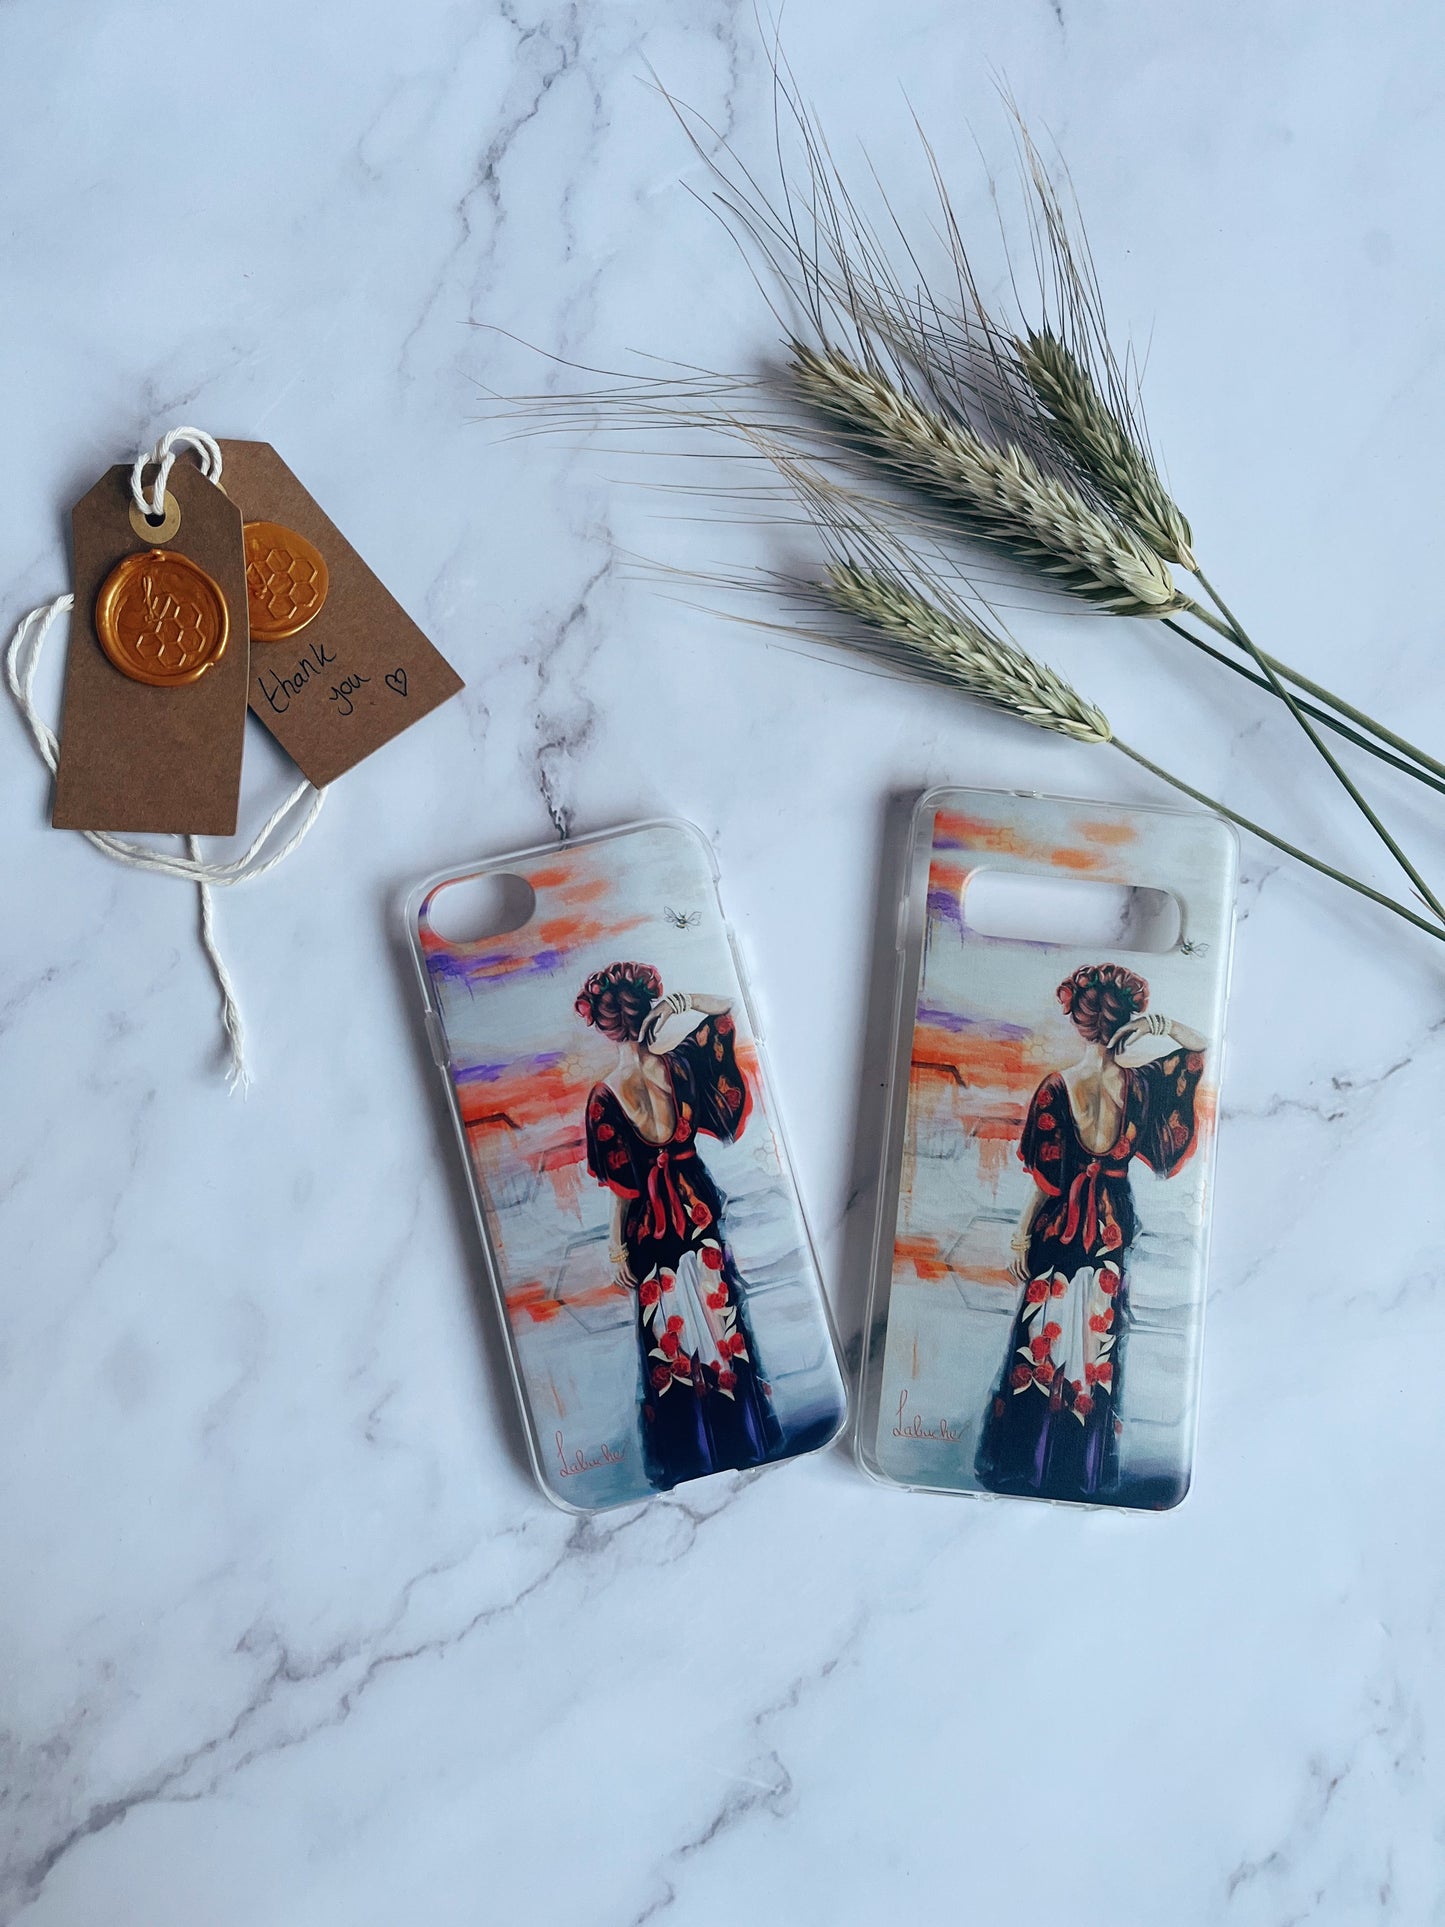 The Queen Silence Soft Phone Case